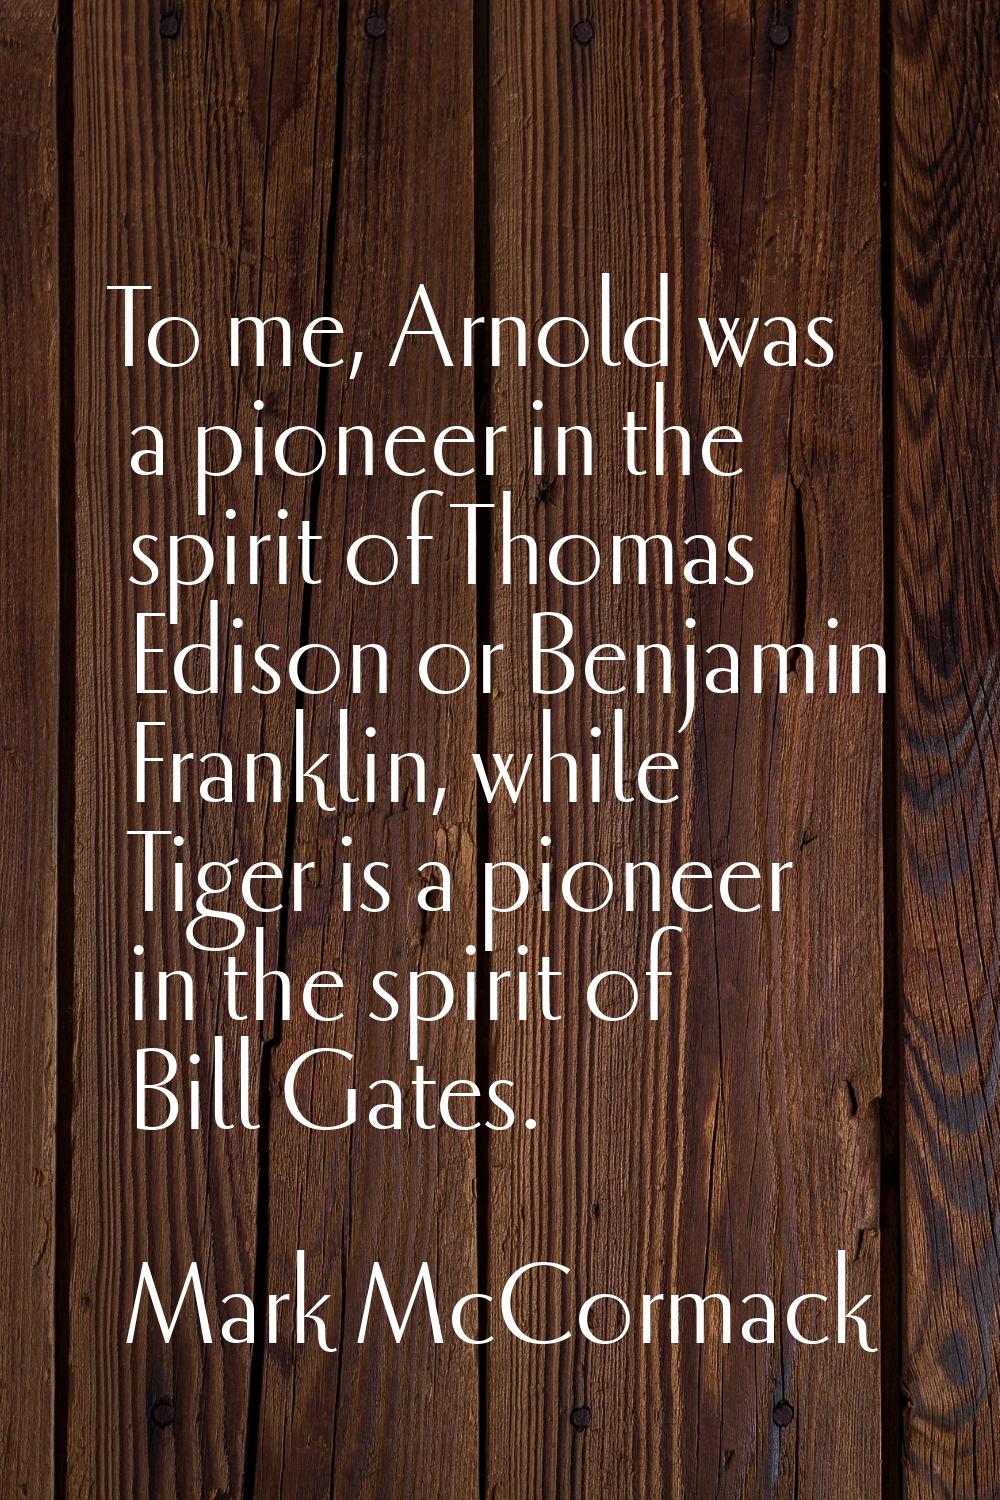 To me, Arnold was a pioneer in the spirit of Thomas Edison or Benjamin Franklin, while Tiger is a p